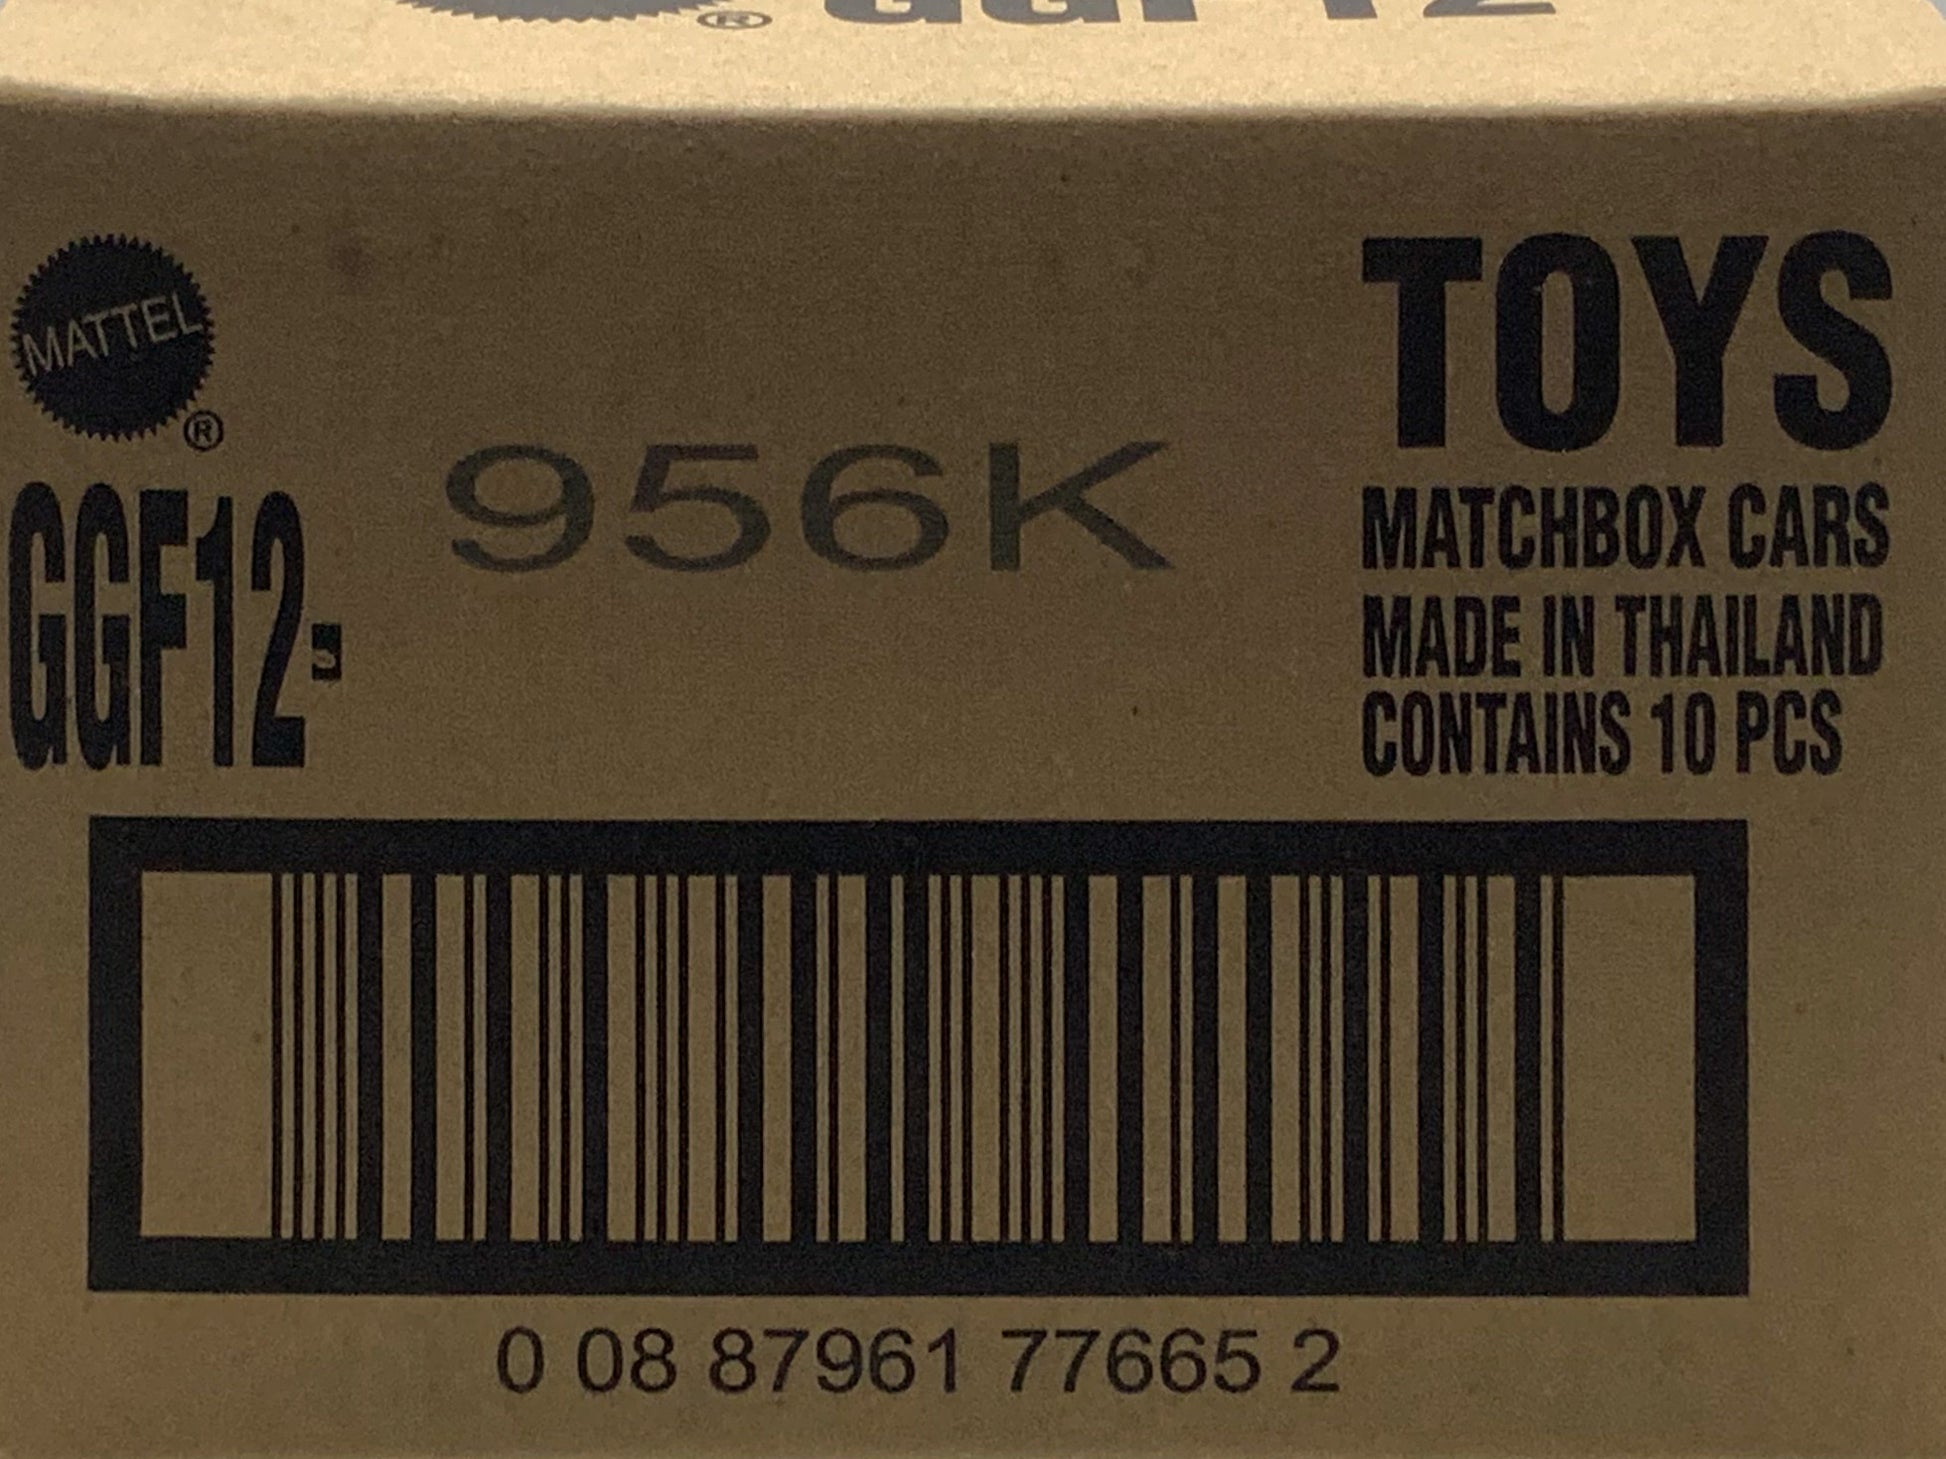 Buy at Tatoy Product Direct from Shipper Manufacturer Box Made in Thailand Matchbox Cars Toys Mattel GGF12 00887961776652